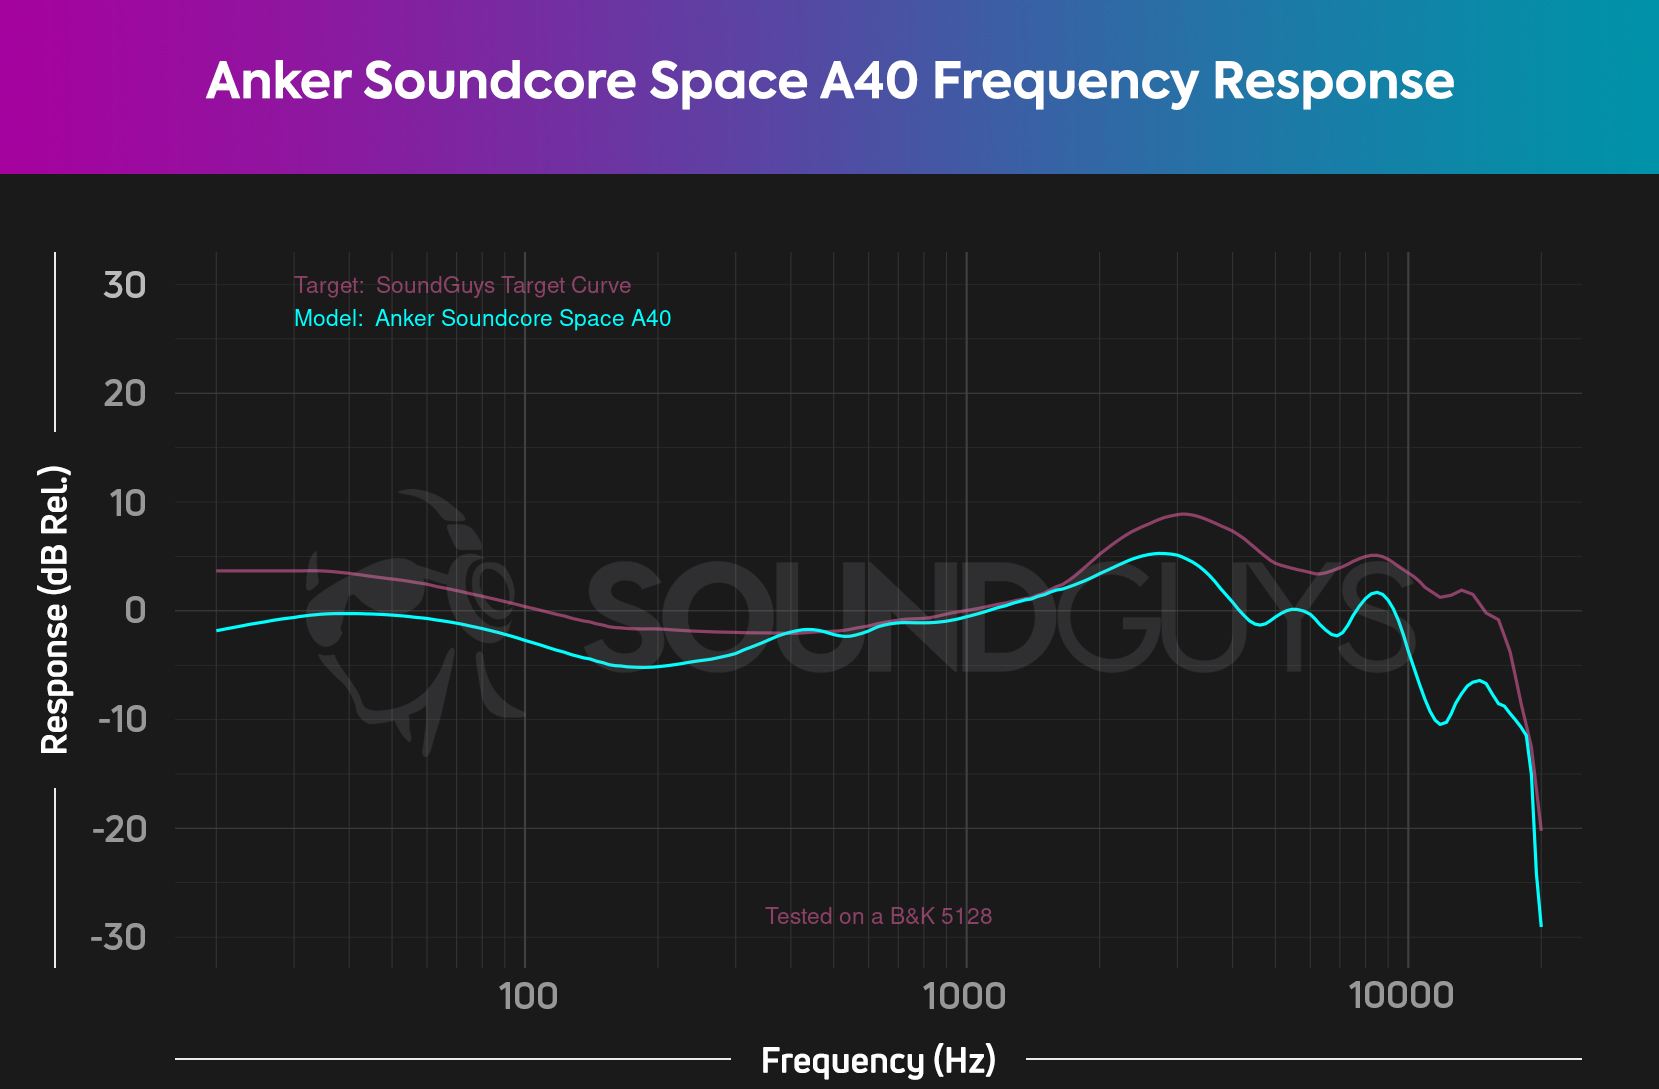 The frequency response chart for the Anker Soundcore Space A40, showing an under-emphasis in the lows and highs, but mids close to our target curve.